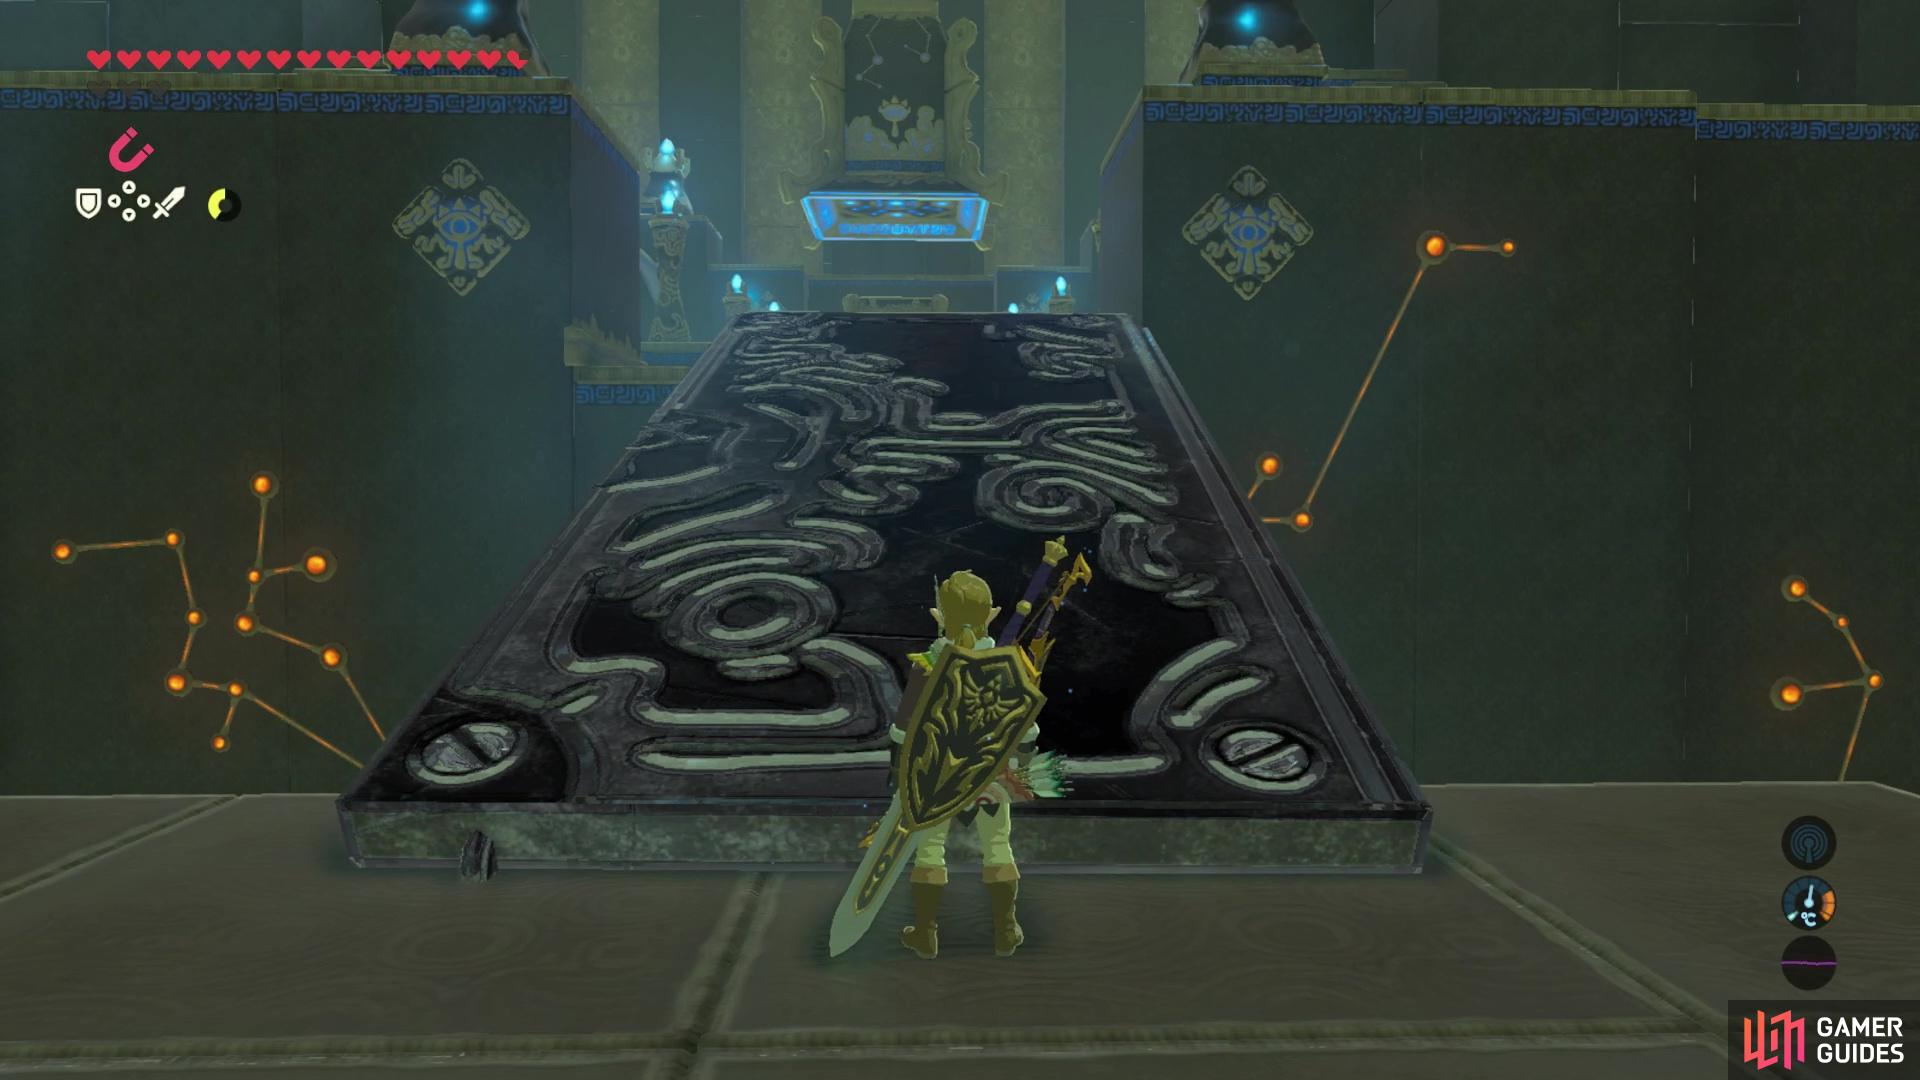 You can use the door to make a ramp to grab treasure and most importantly to head to the end of the shrine!